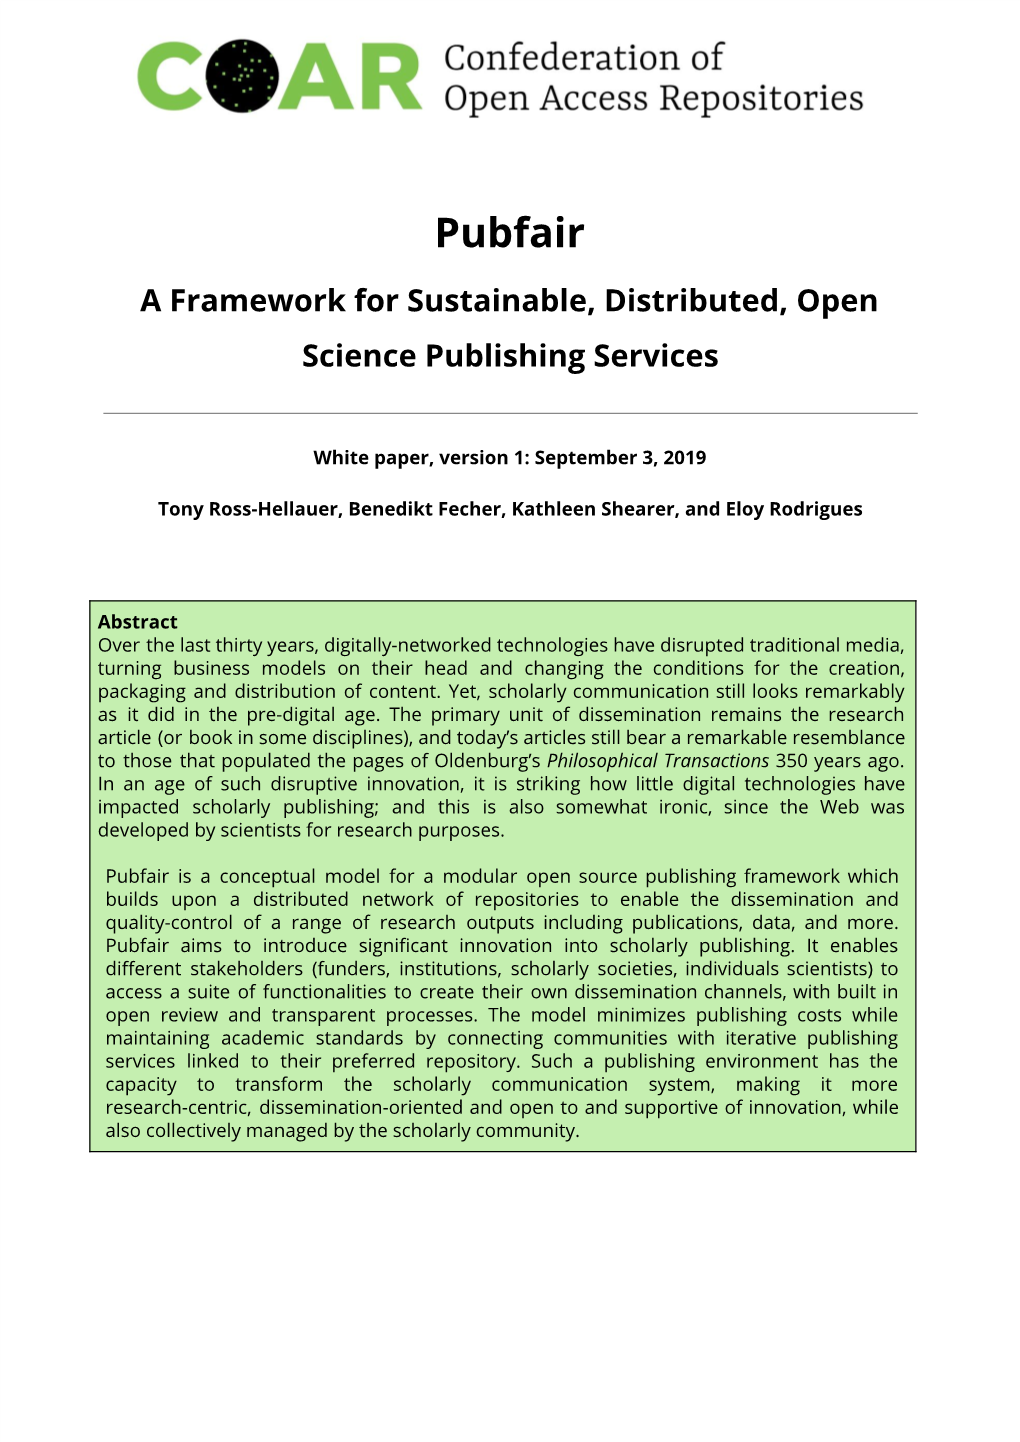 Pubfair: a Framework for Sustainable, Distributed, Open Science